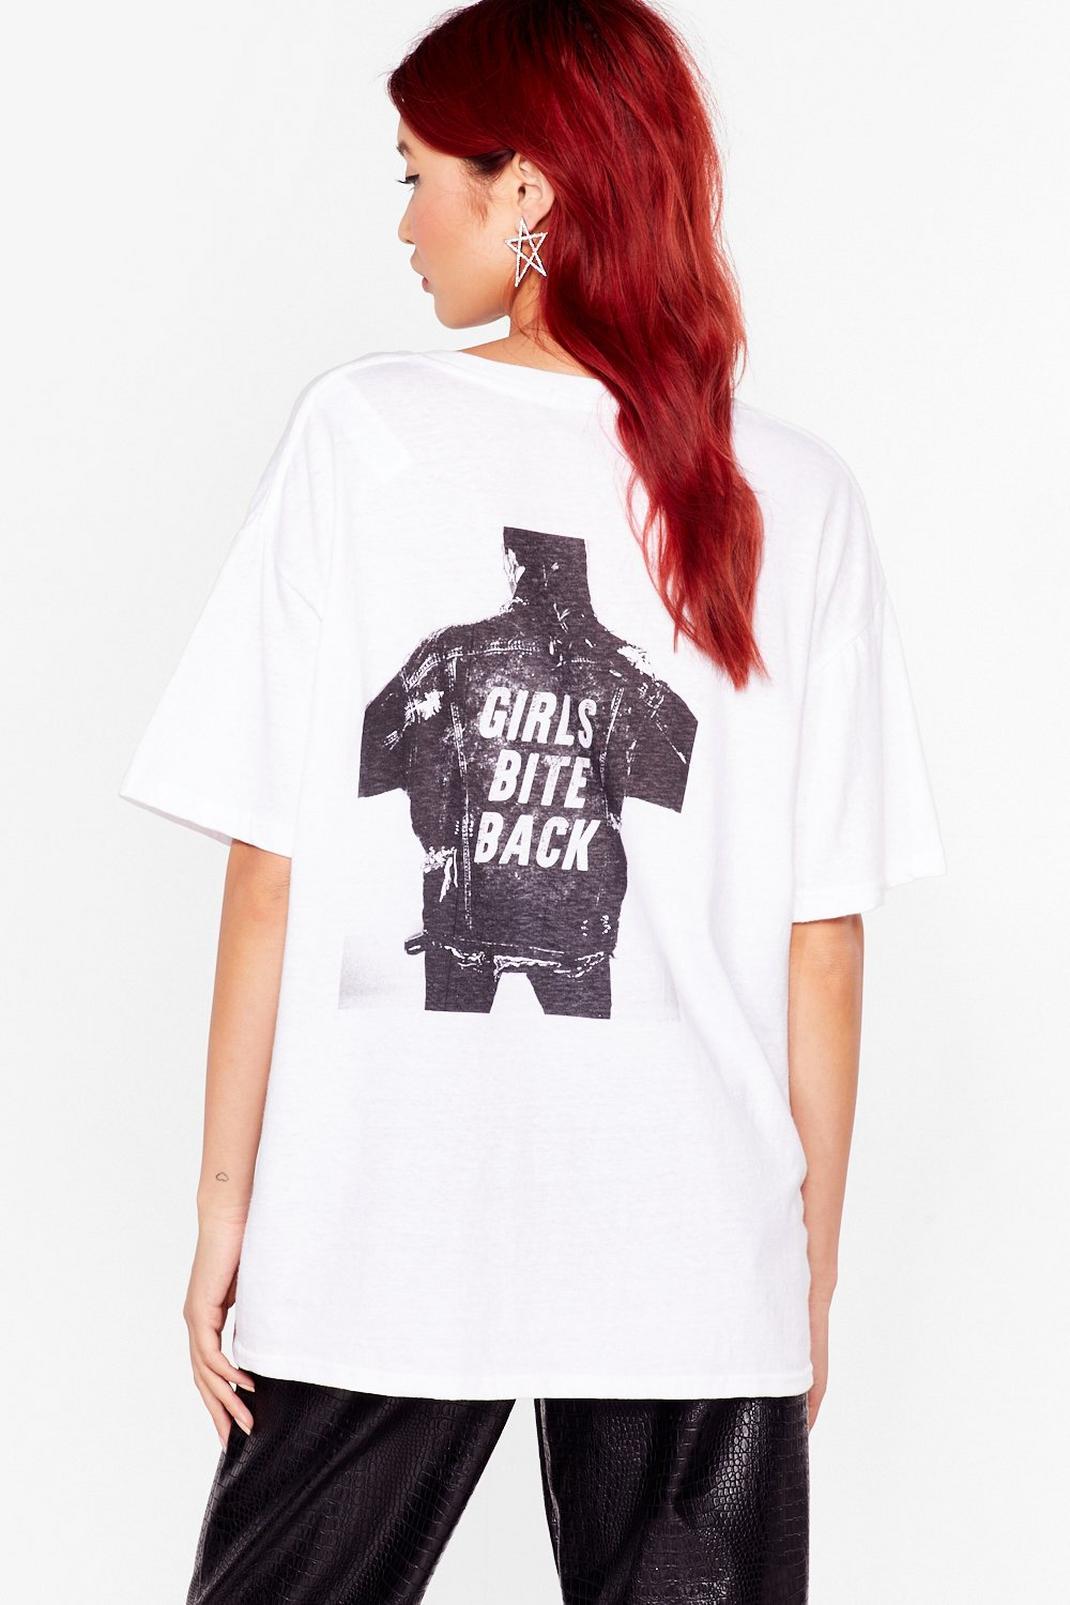 Girls Bite Back Relaxed Graphic Tee image number 1